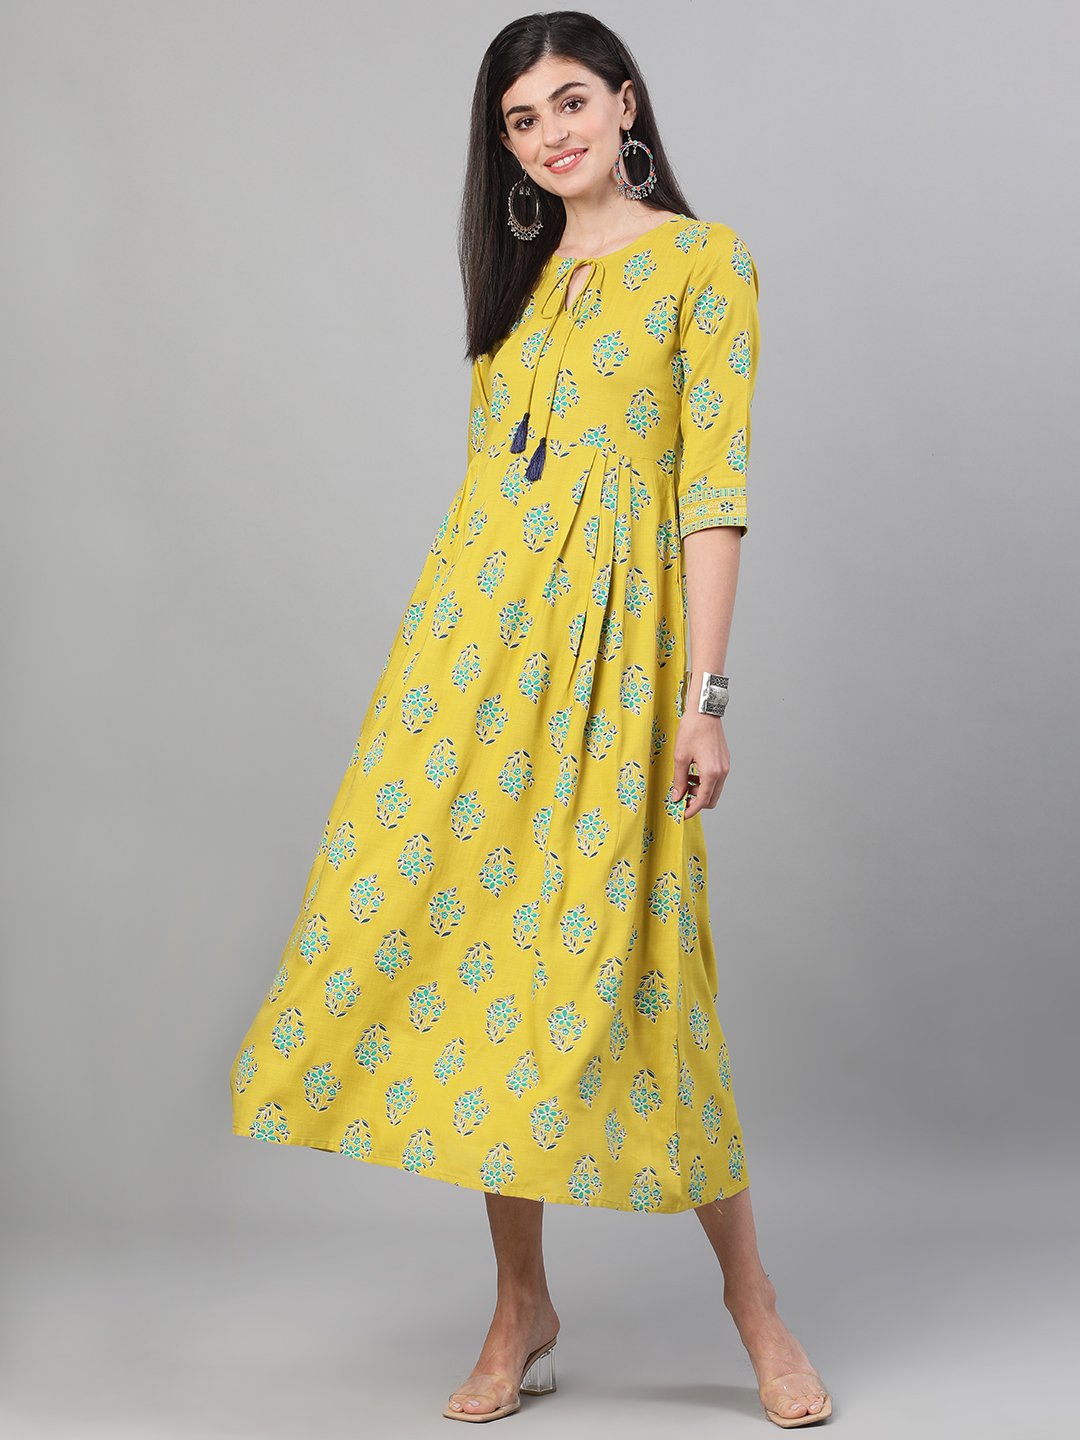 Women's Green Printed Round Neck Viscose Rayon Fit And Flare Dress With Pockets - Nayo Clothing